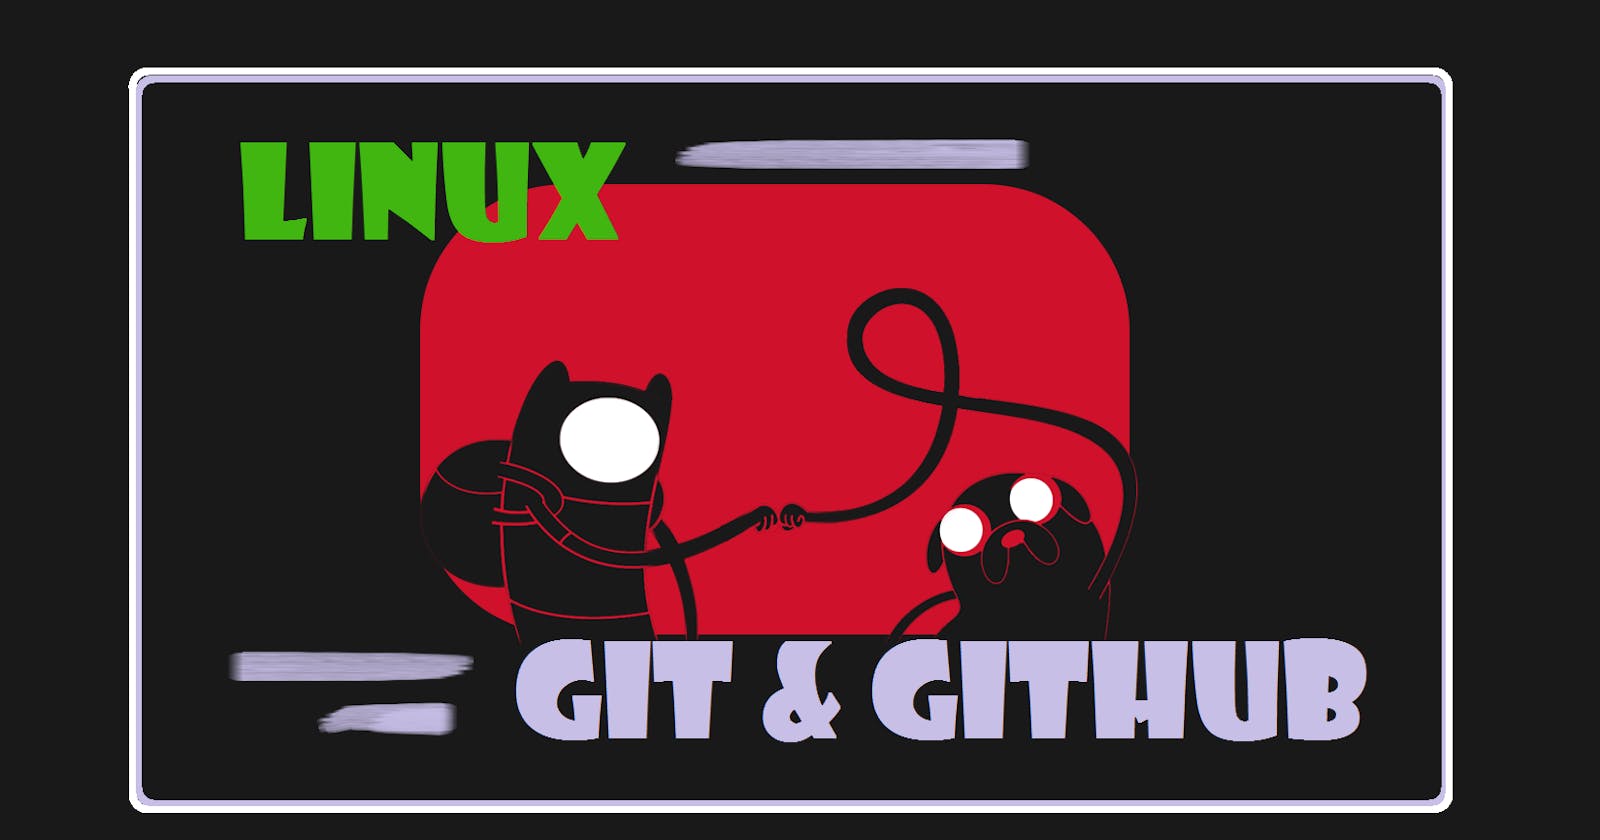 Cheat-Sheet for Linux and Git/GitHub